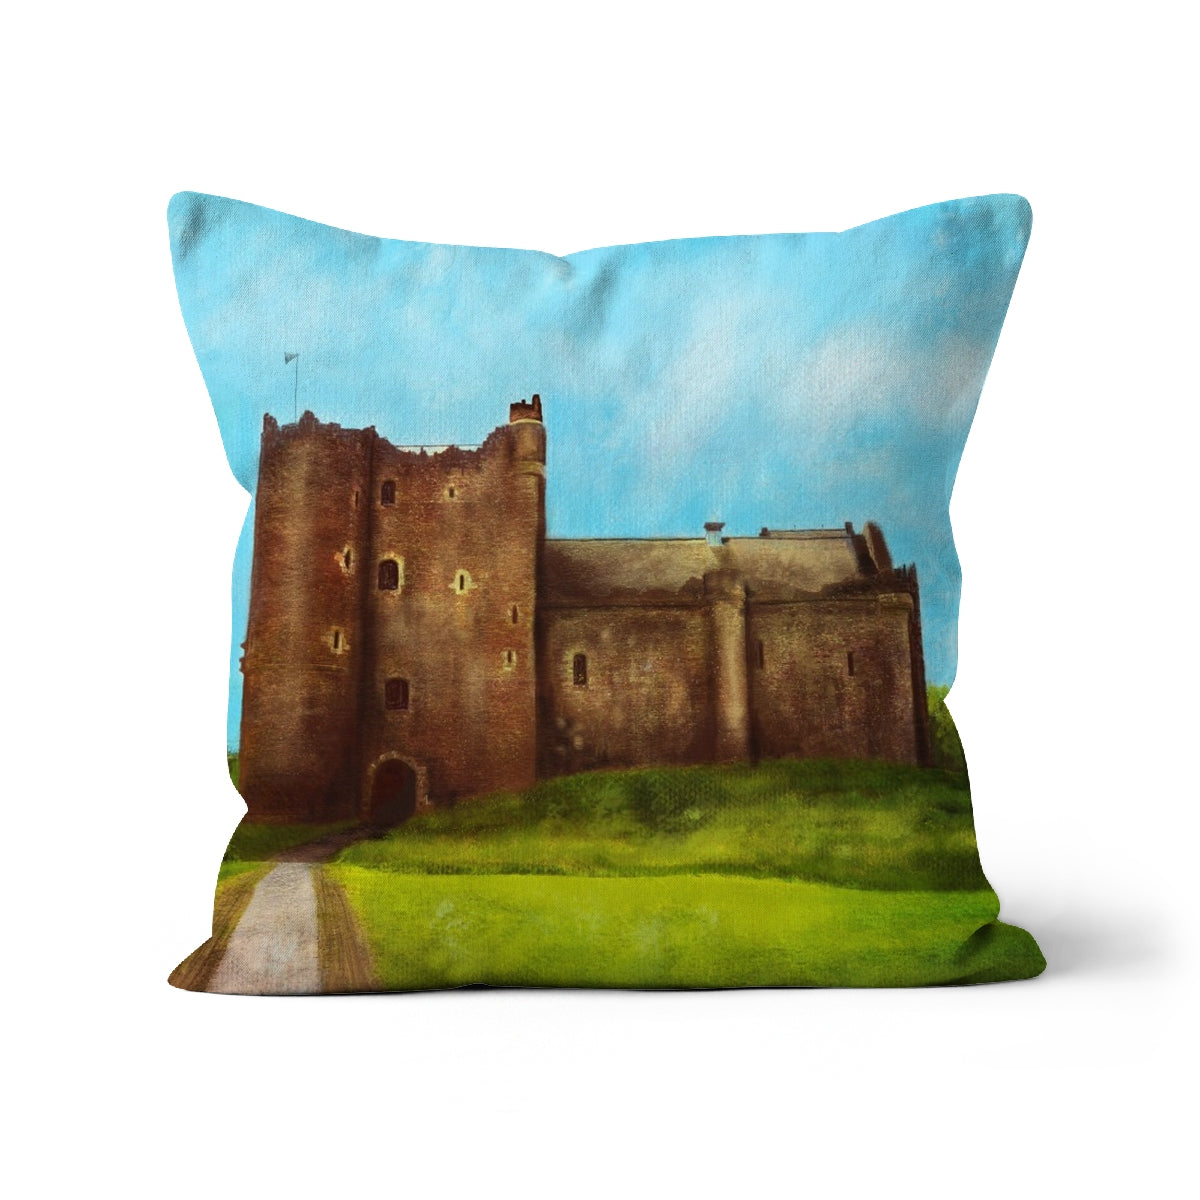 Doune Castle Art Gifts Cushion-Cushions-Historic & Iconic Scotland Art Gallery-Linen-16"x16"-Paintings, Prints, Homeware, Art Gifts From Scotland By Scottish Artist Kevin Hunter